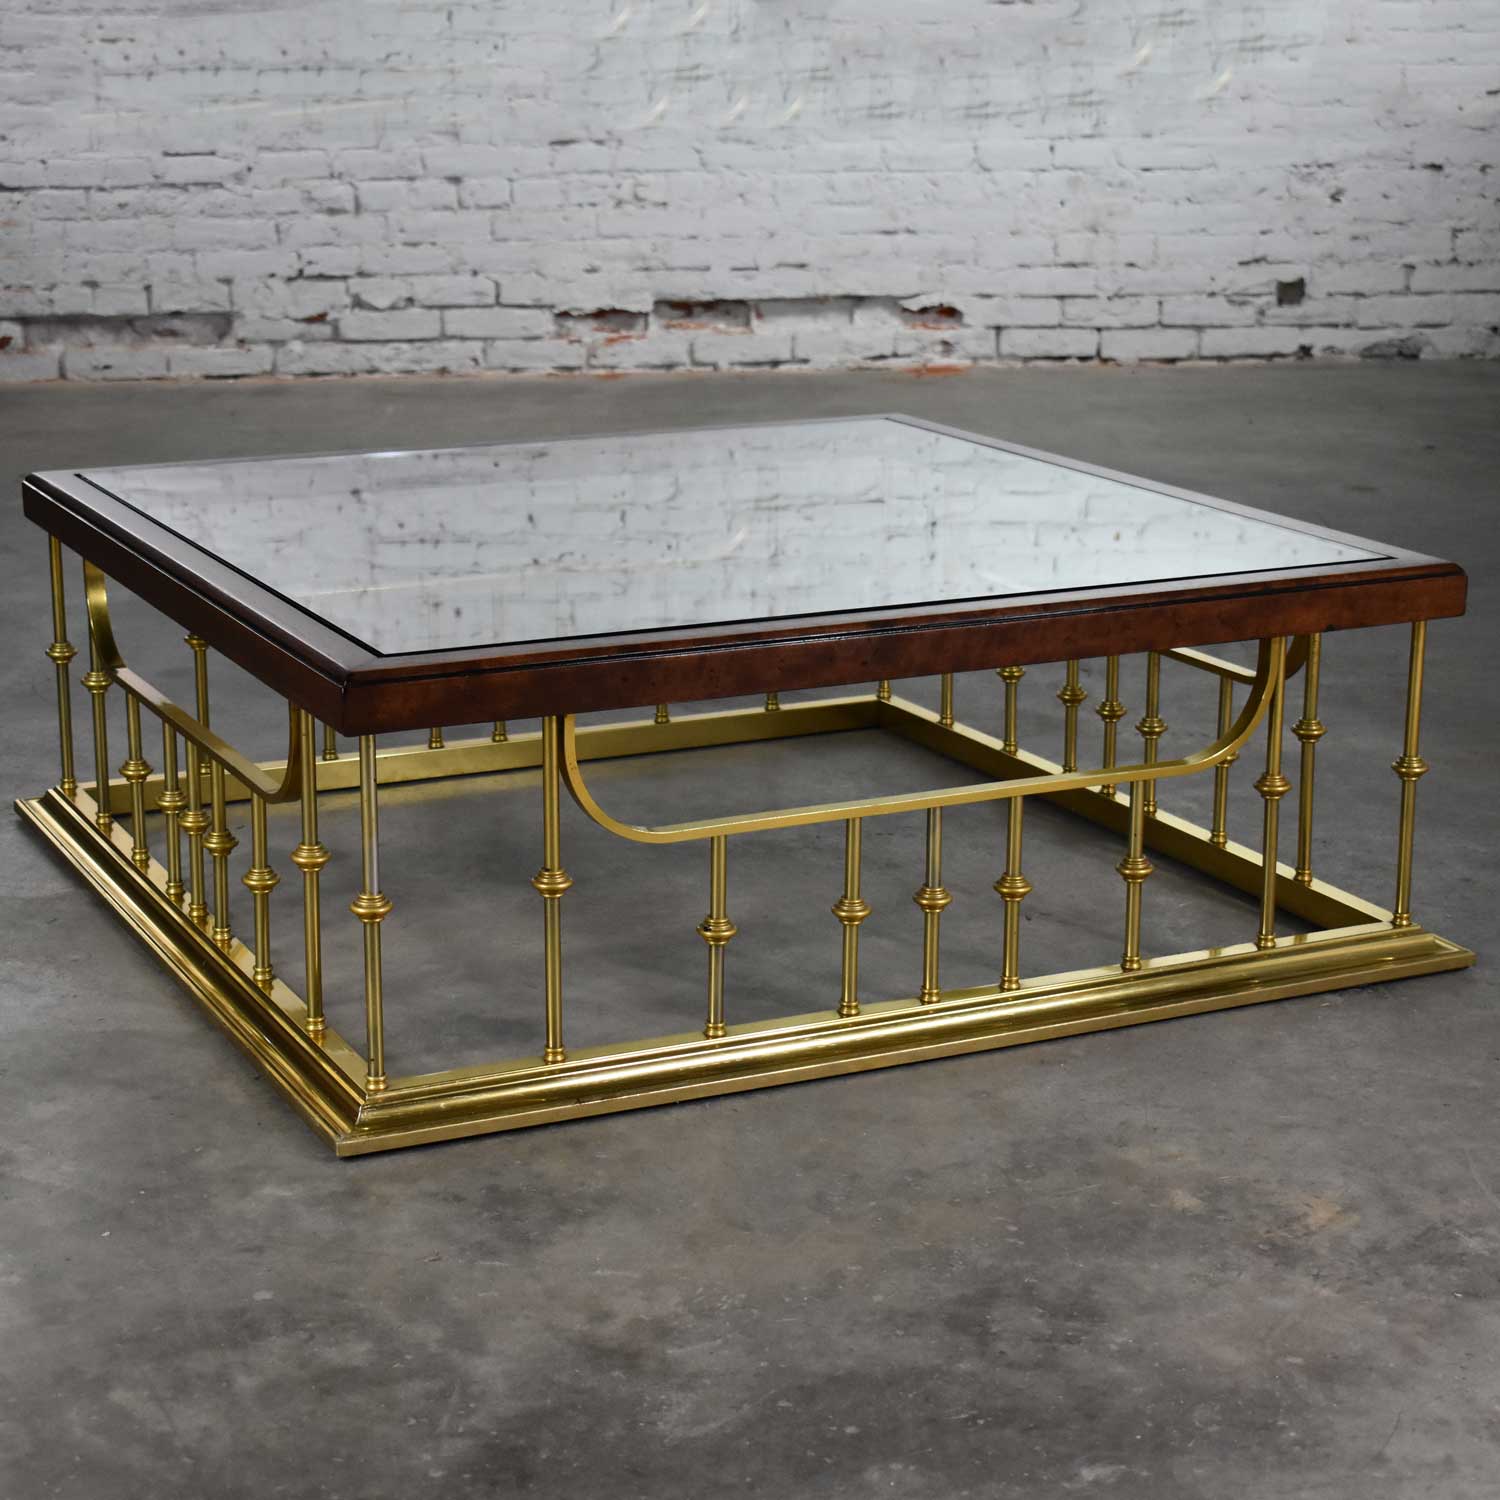 Brass Plated Glass Wood Fireplace Fender Style Large Square Coffee Table Erwin Lambeth Attr.